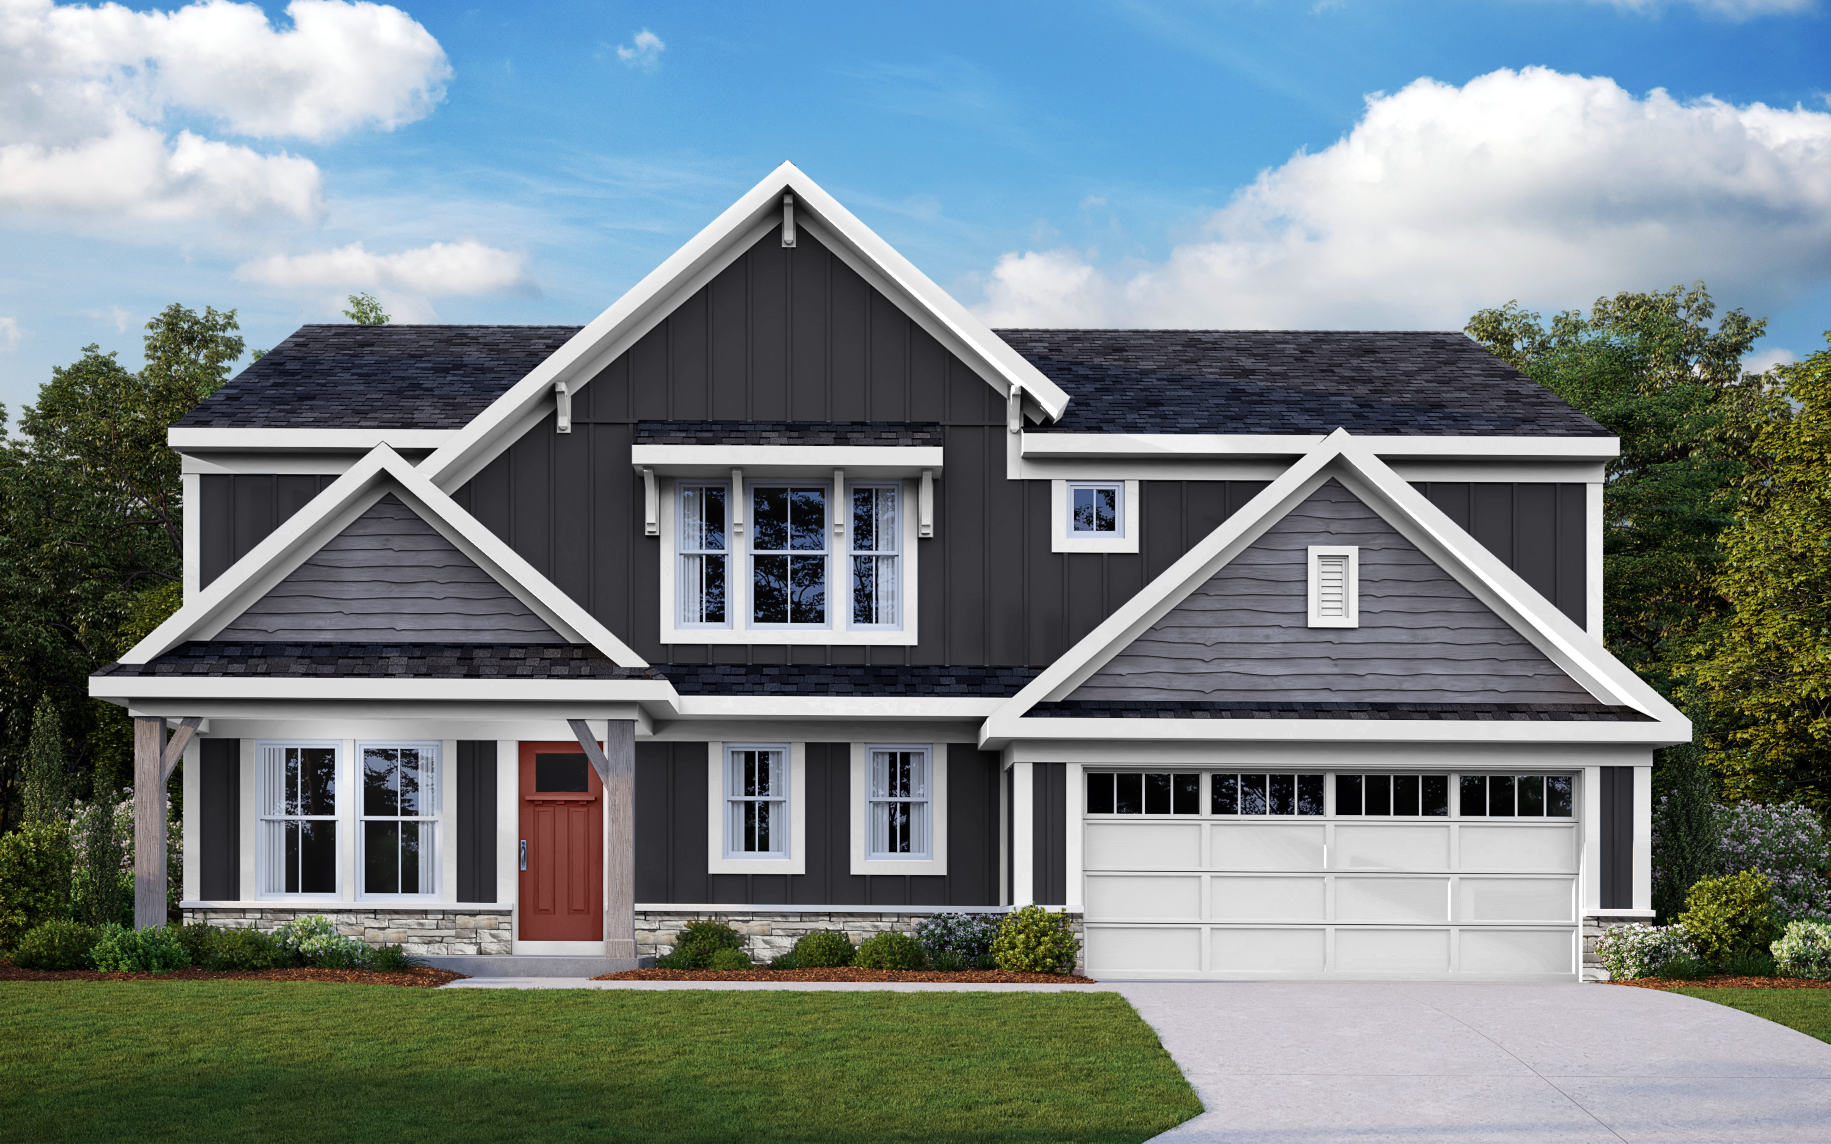 Fischer Homes is thrilled to present this year's St. Jude Dream Home valued at around $475,000 located in our community Bluegrass Meadows, which showcases new homes from our Designer, Maple Street, and Paired Patio Home Collection.